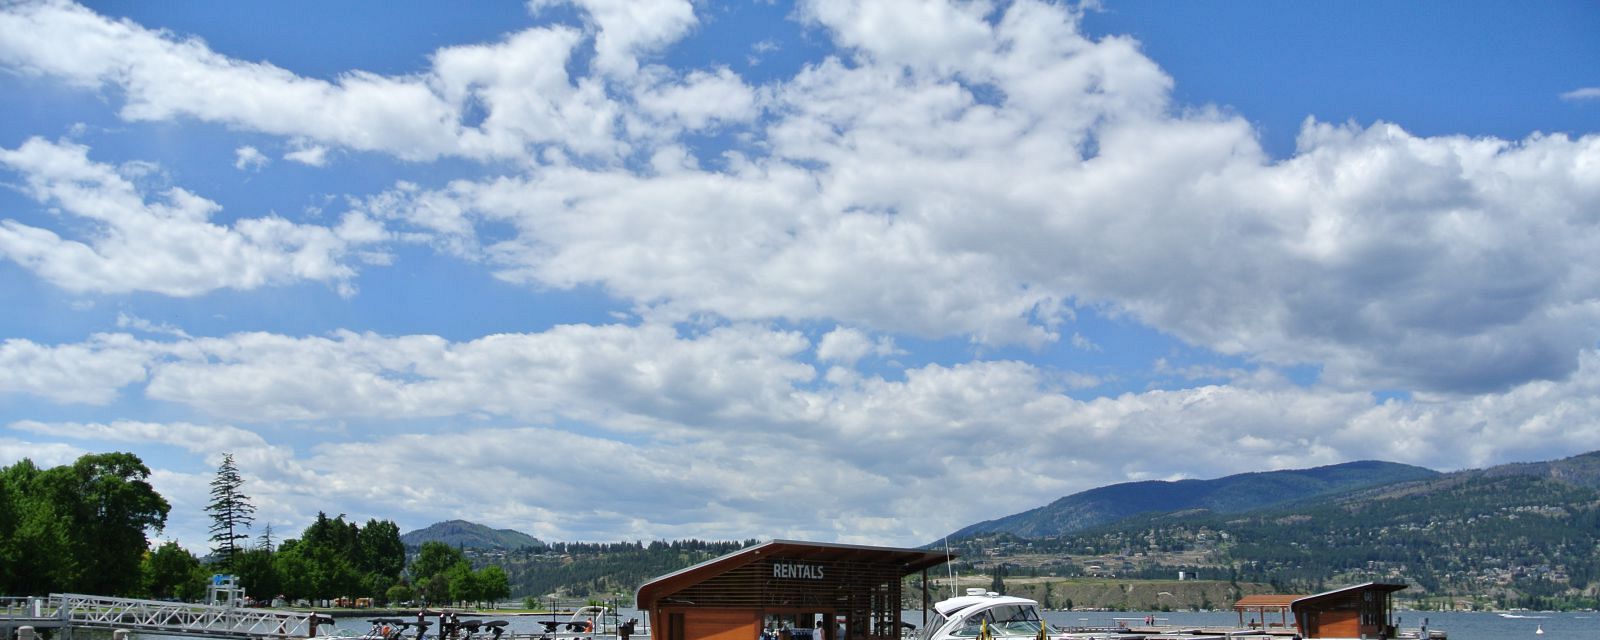 Why not rent a boat in Kelowna?